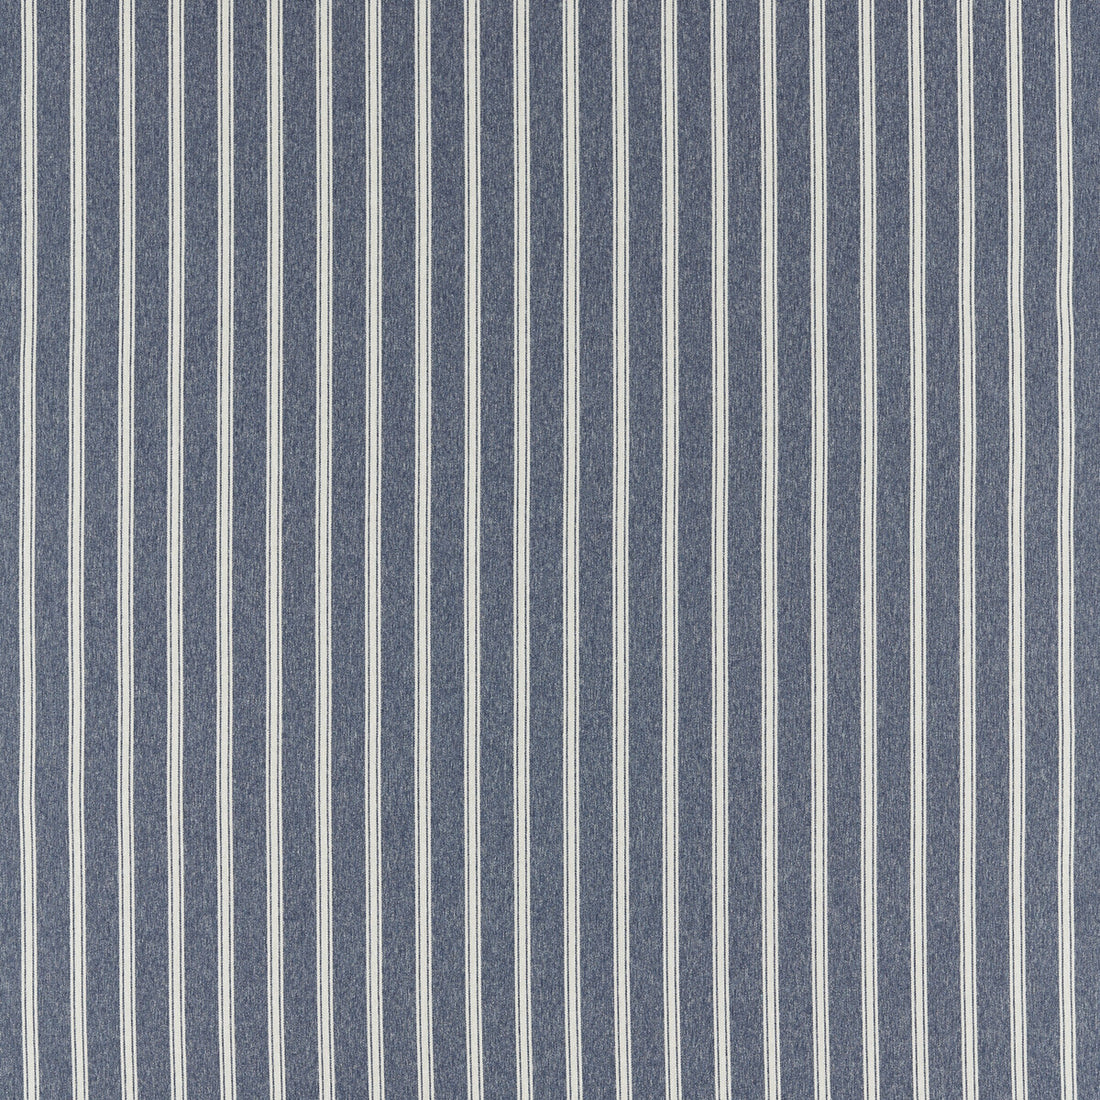 Anderson fabric in midnight color - pattern F1567/03.CAC.0 - by Clarke And Clarke in the Clarke &amp; Clarke Burlington collection